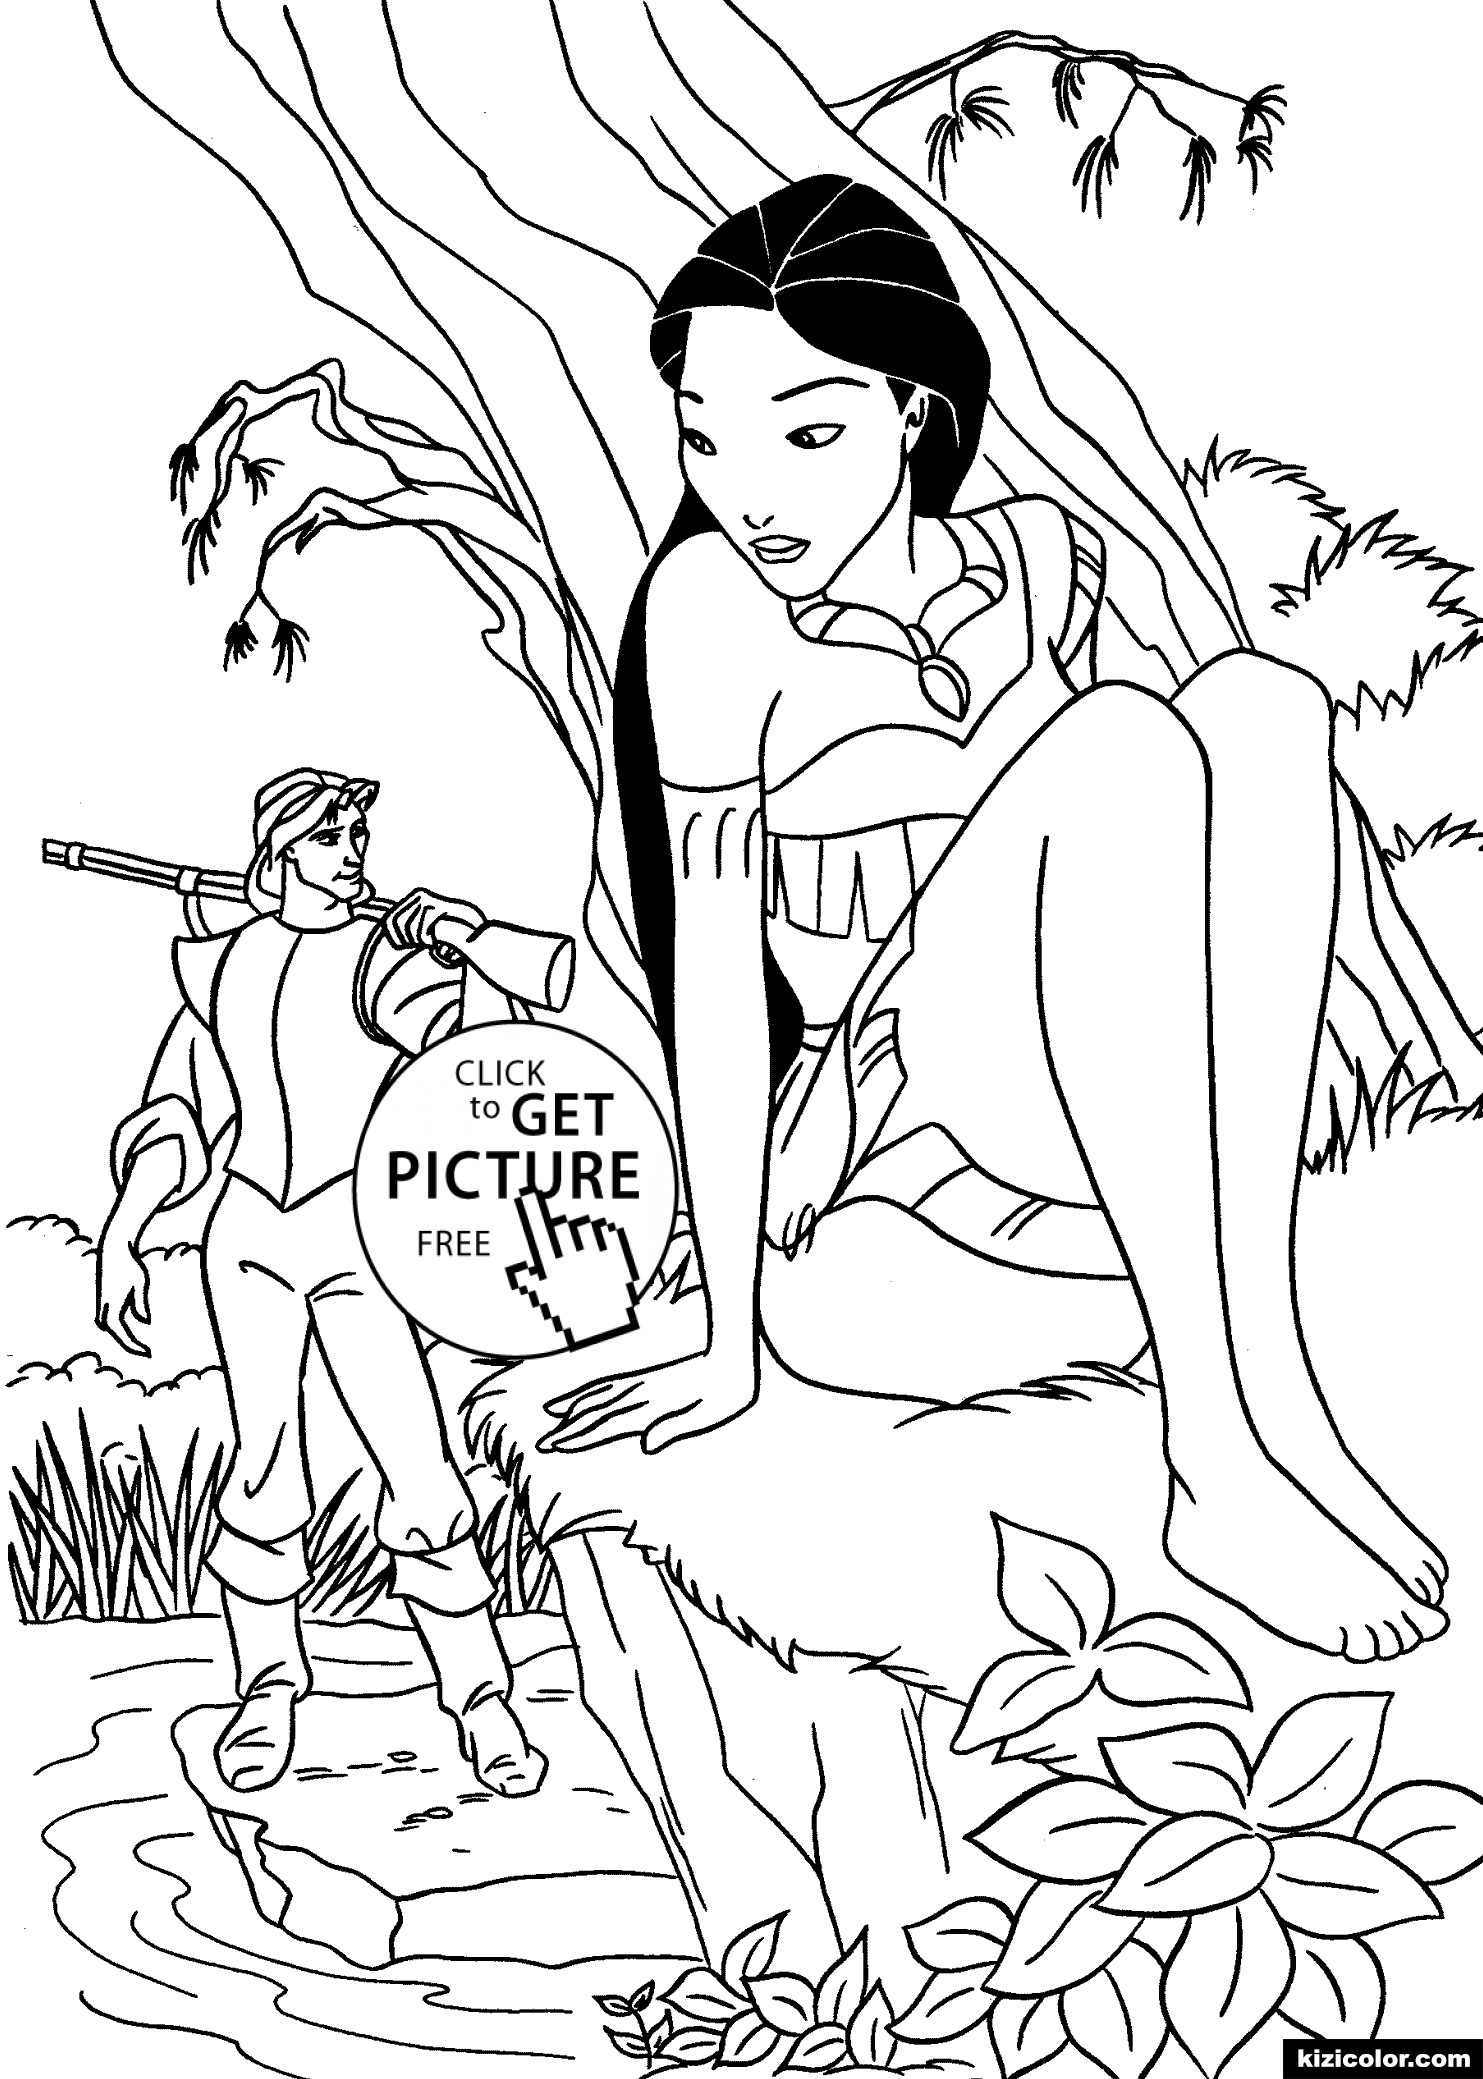 Pocahontas With John Smith 02 - Kizi Free Coloring Pages For ...